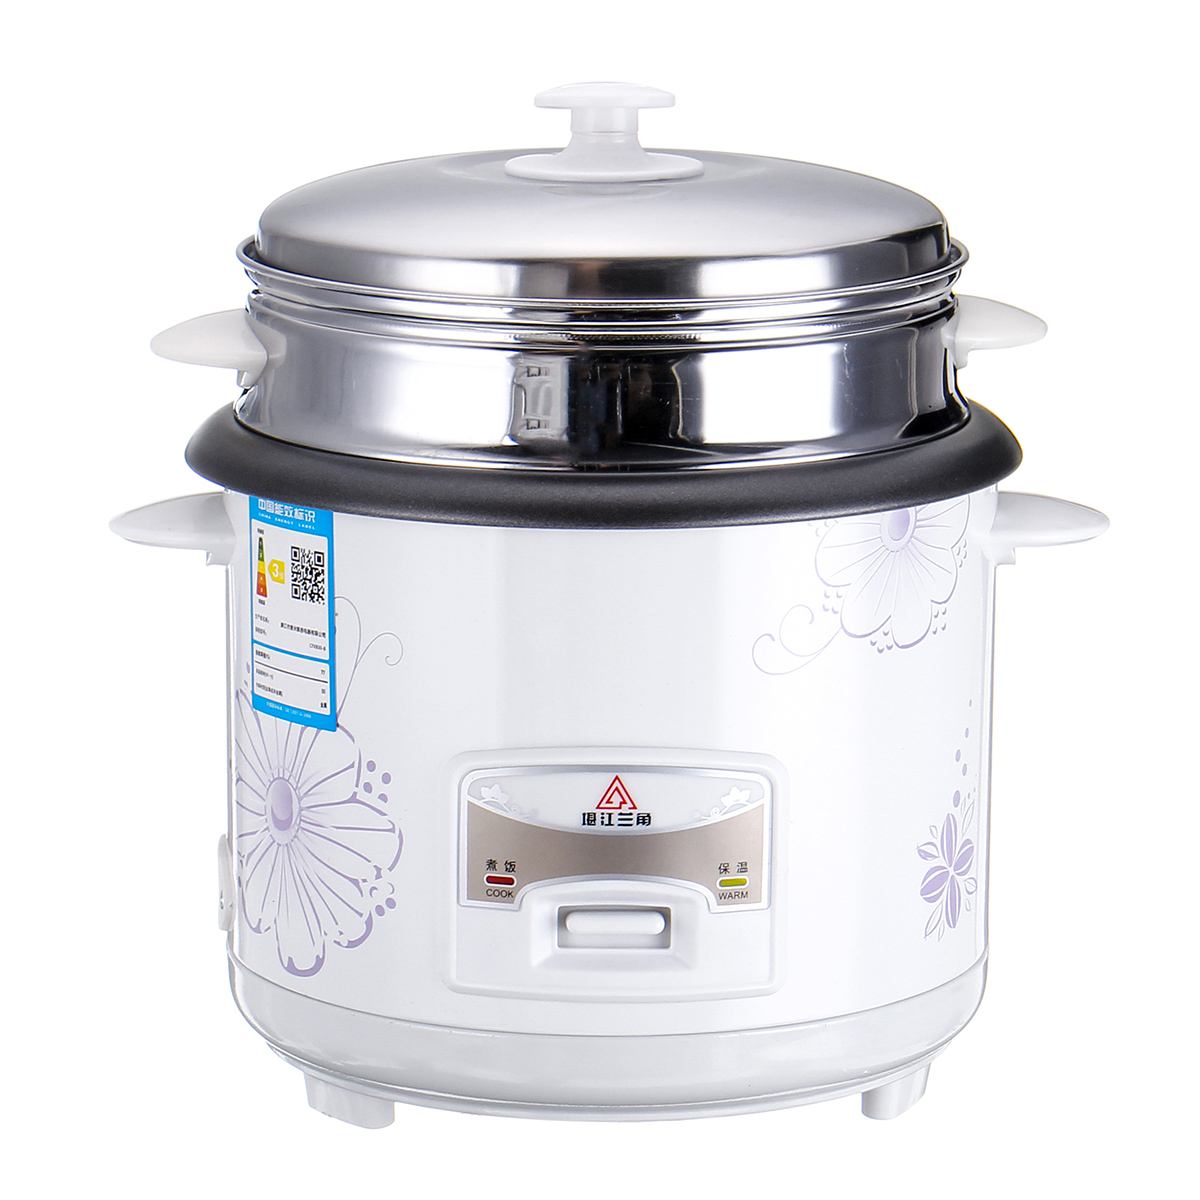 warmtoo 1.5/2/3L Automatic Electric Non-Stick Rice Cooker Food Steamer Cooking Warmer 220V 50Hz Mechanical Switch Button